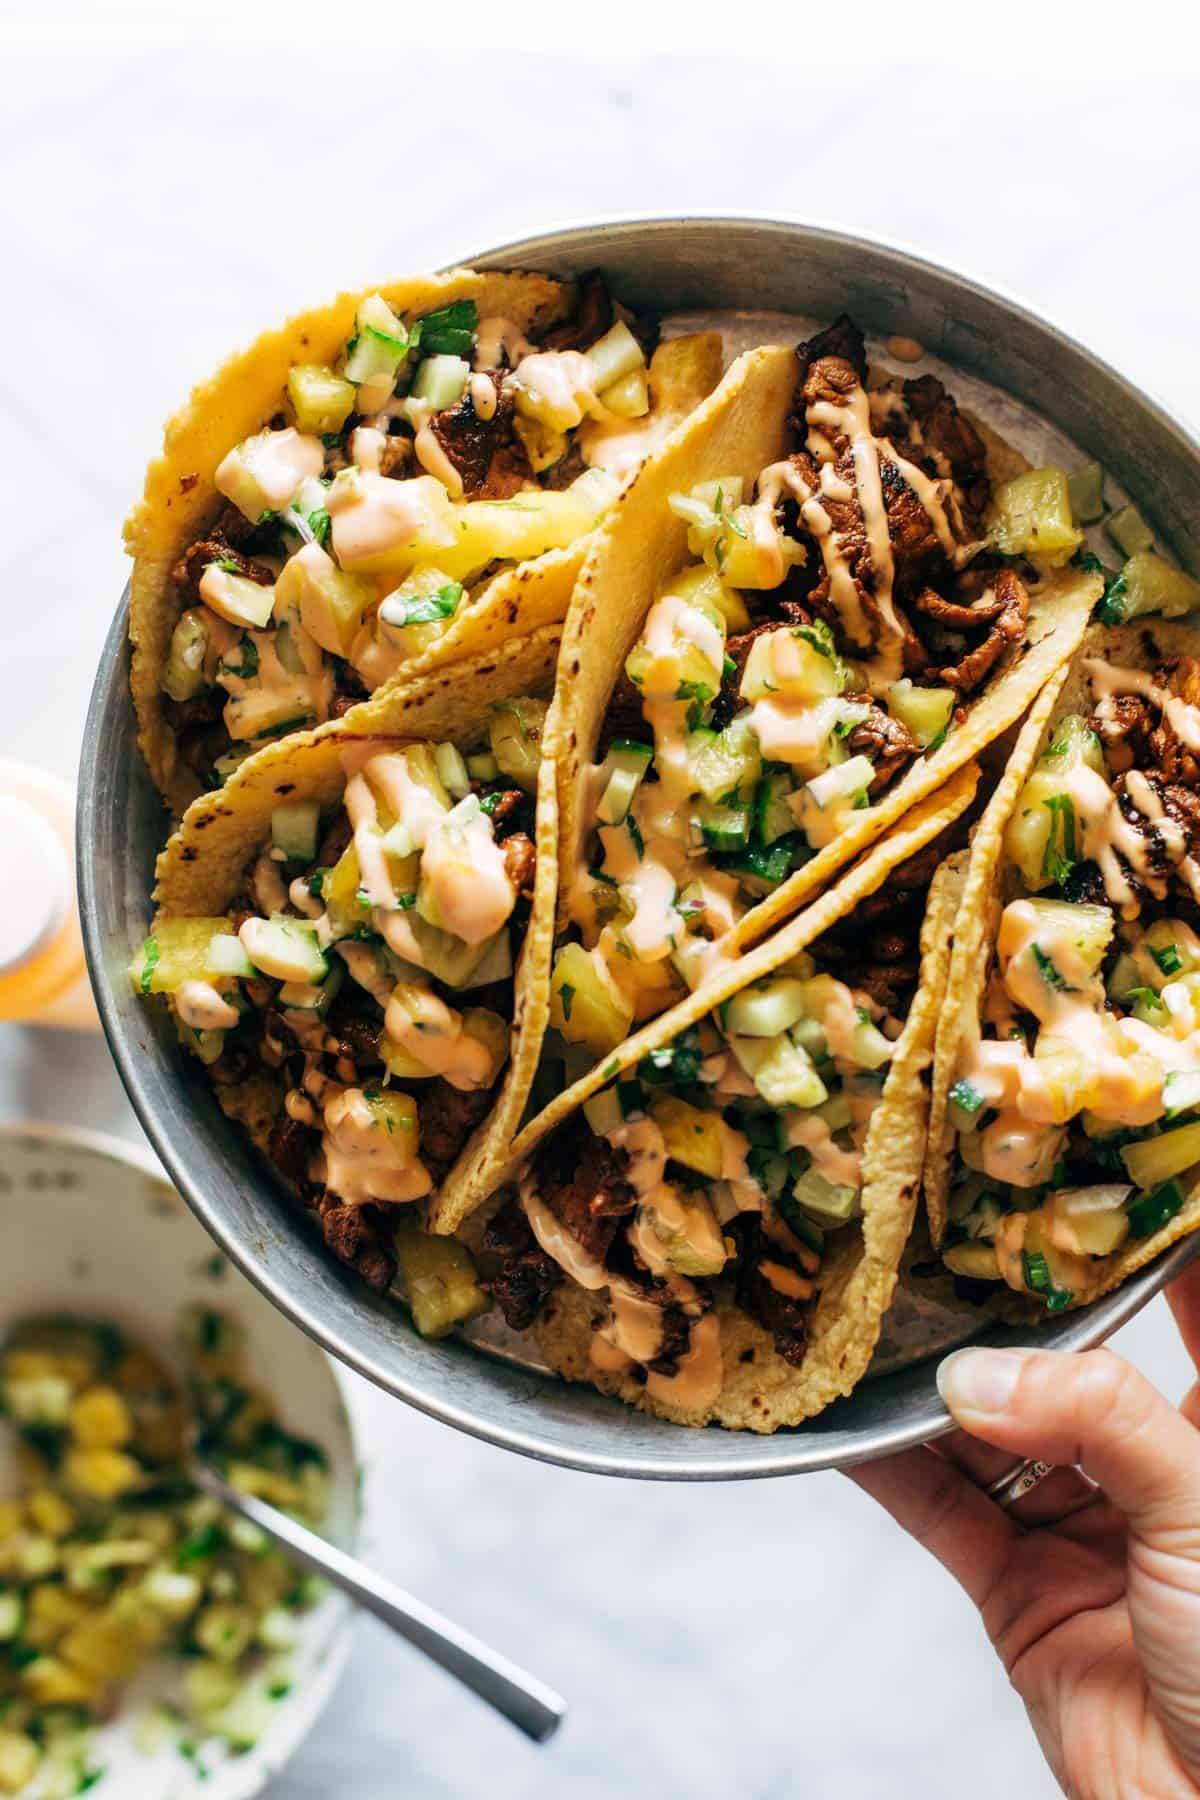 Pork tacos in a dish with a pineapple cucumber salsa